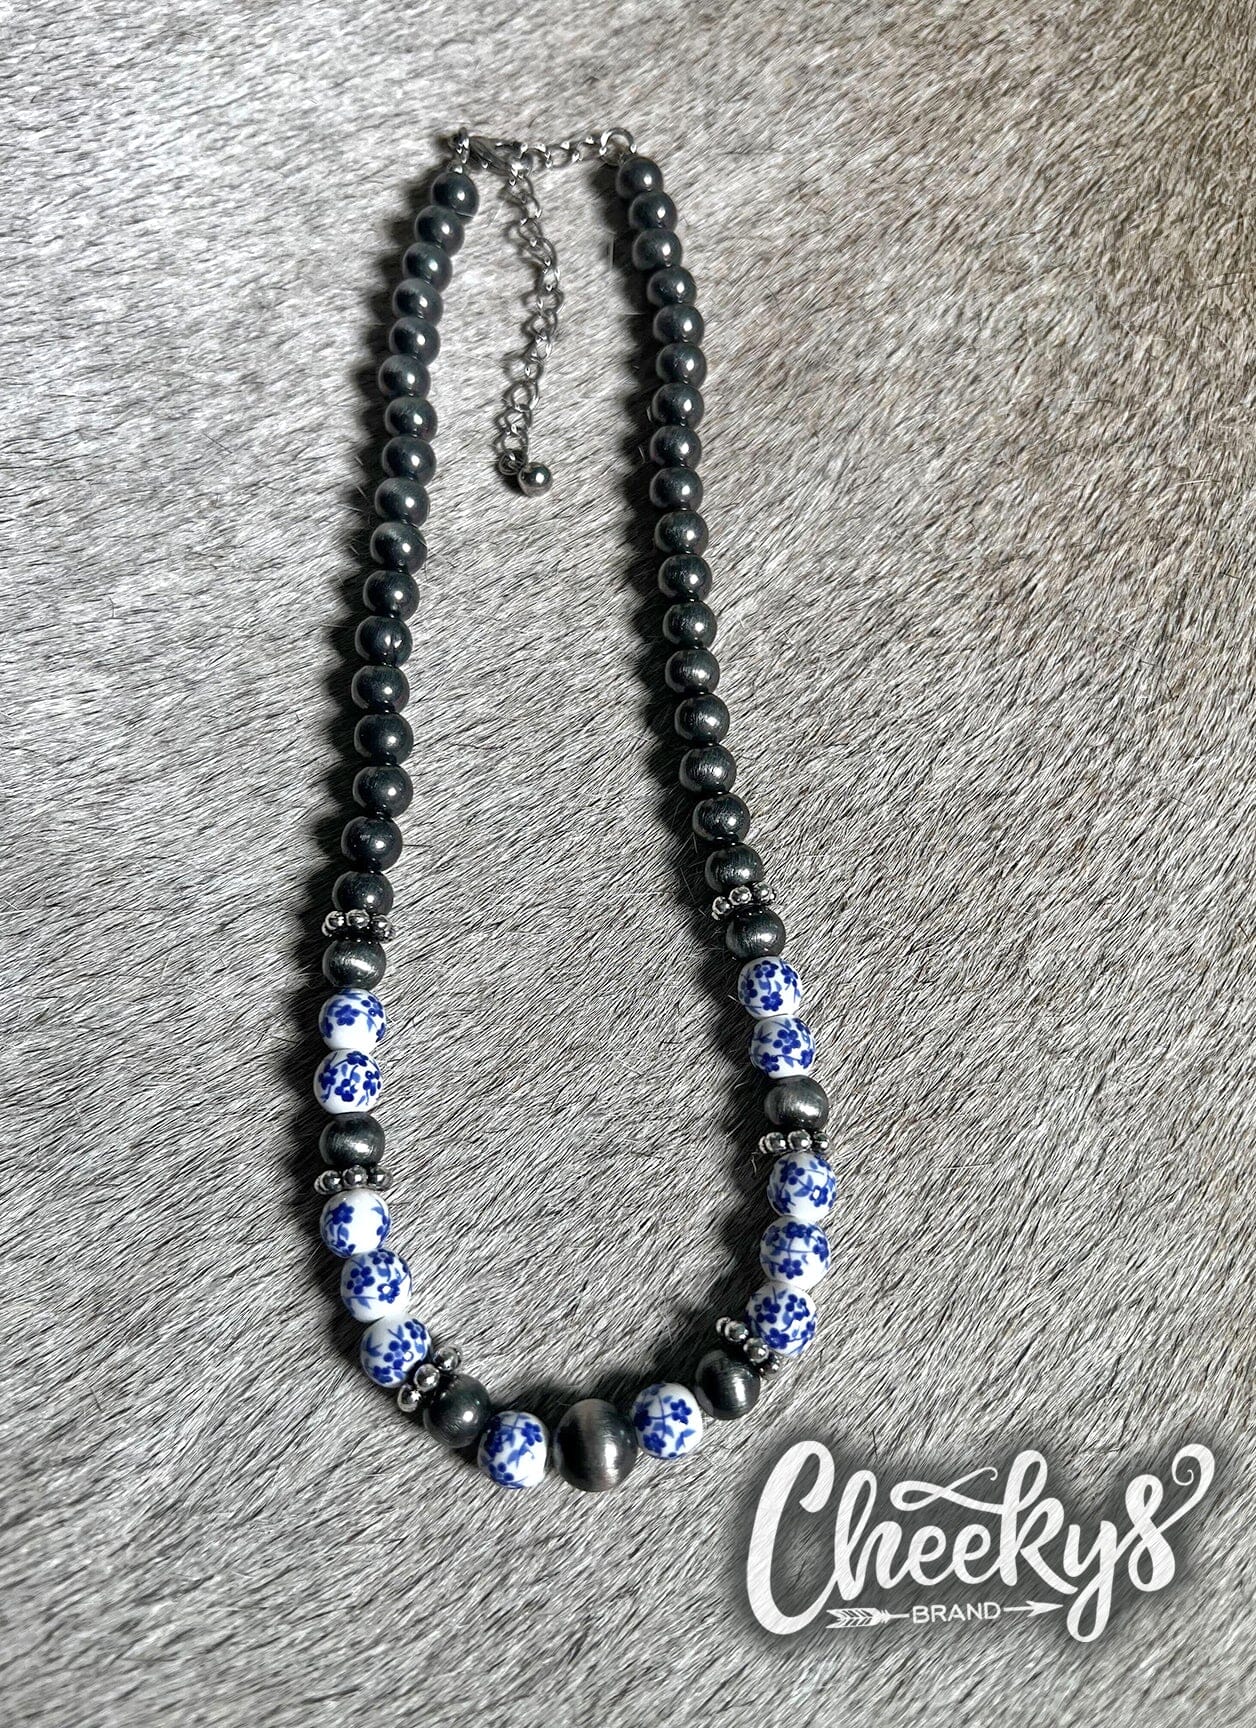 Blue Flower Navajo Pearl Necklace Cheekys Brand 